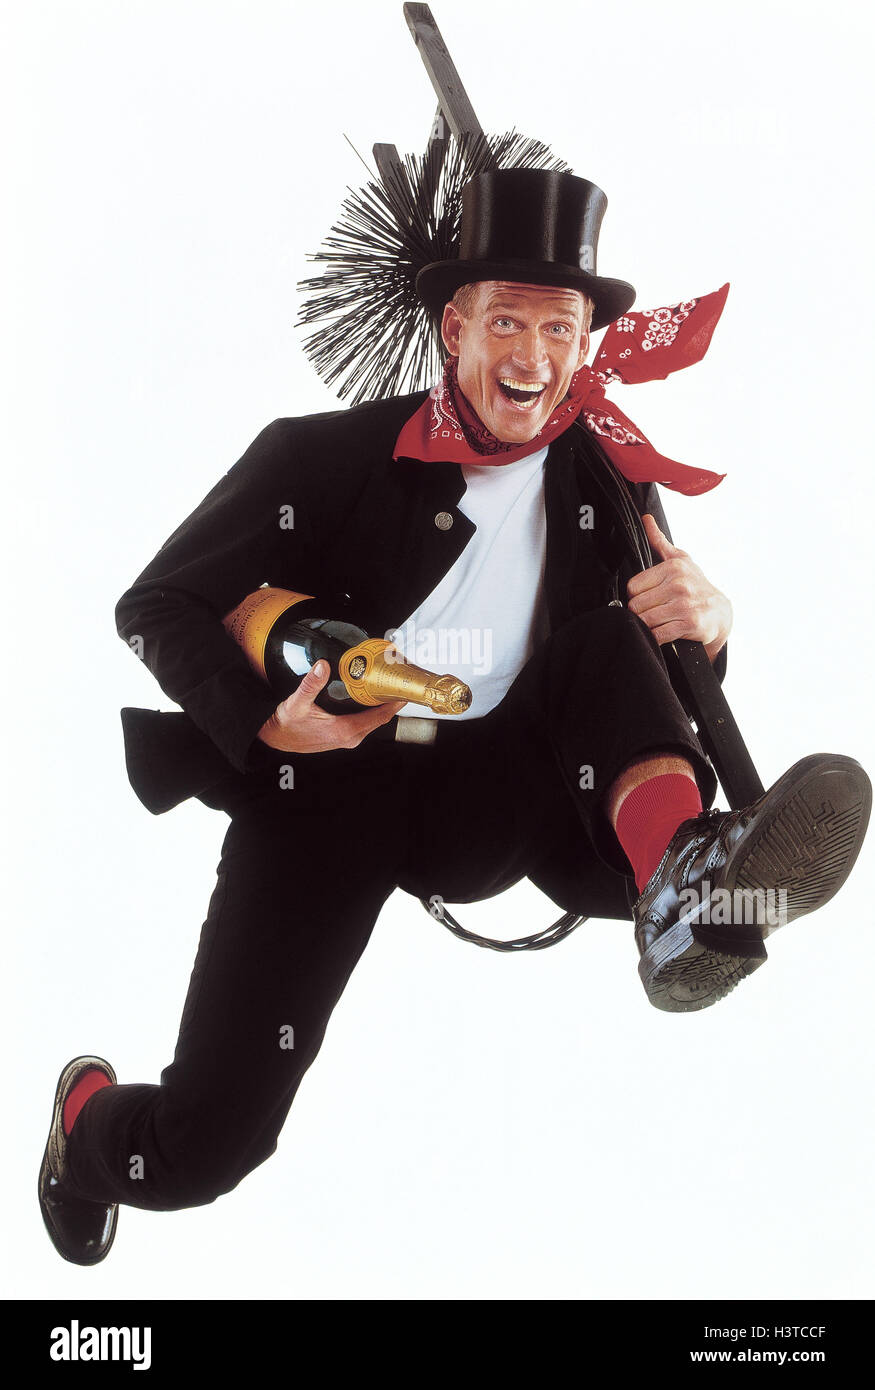 Chimney sweeps, champagne Bottle, caper, joy, luck, New Year's Eve, New Year luck bringer, chimney sweep, laugh, motion, run, crack, studio, cut out, superstition, faith, luck, positively Stock Photo